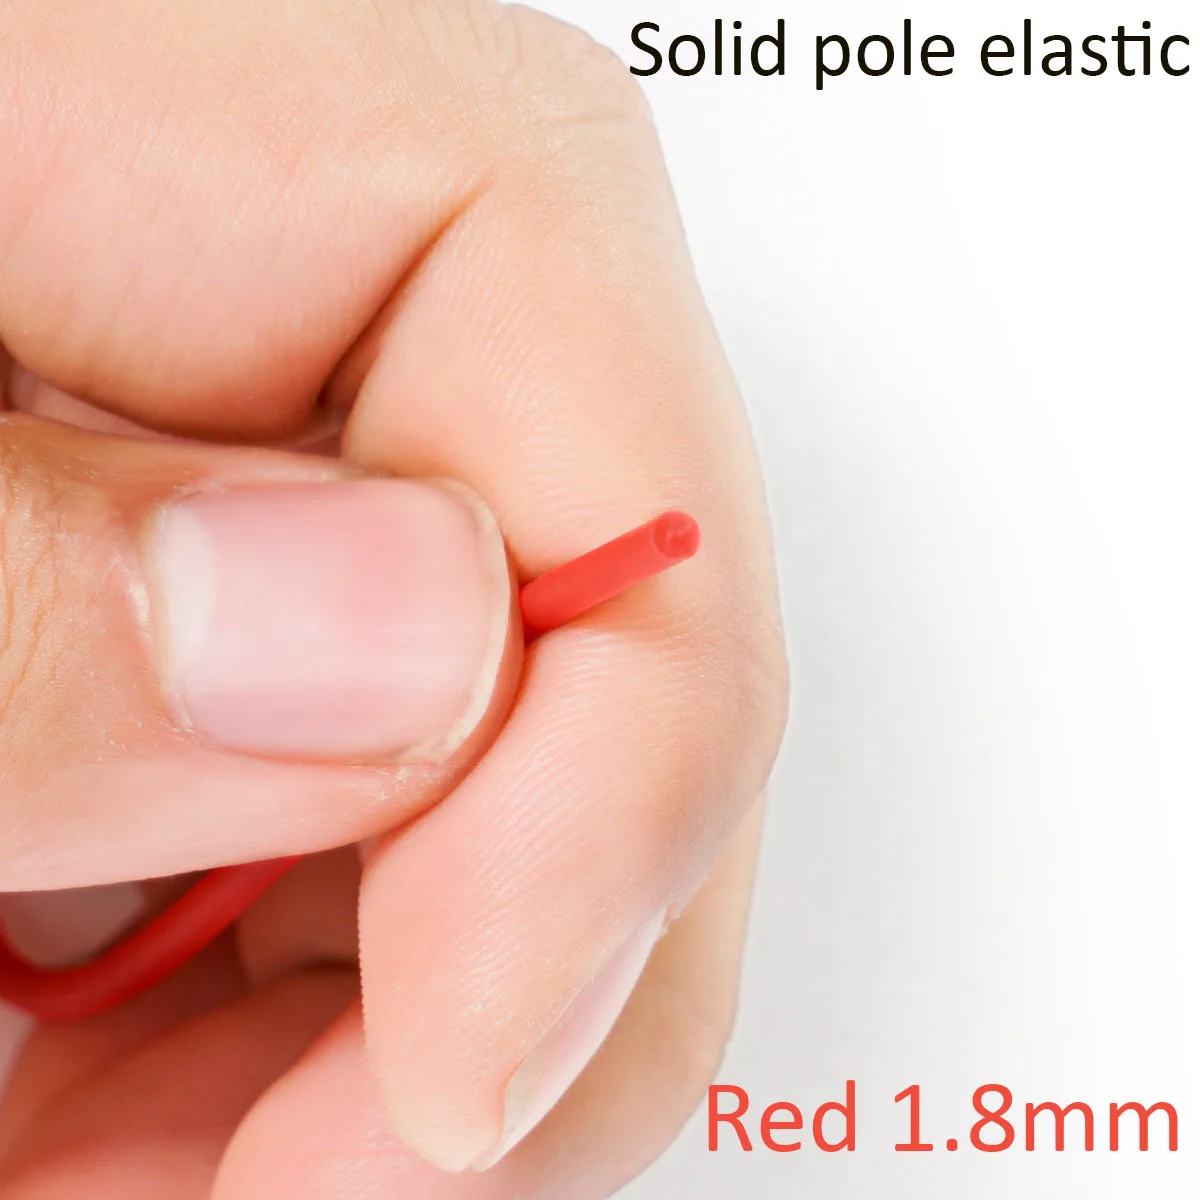 New 3m/6m/10m/20/50m Solid Core Pole Elastic Red Diameter 1.8mm Fishing Lines Latex Tube Retention Rope Fishing Tackles